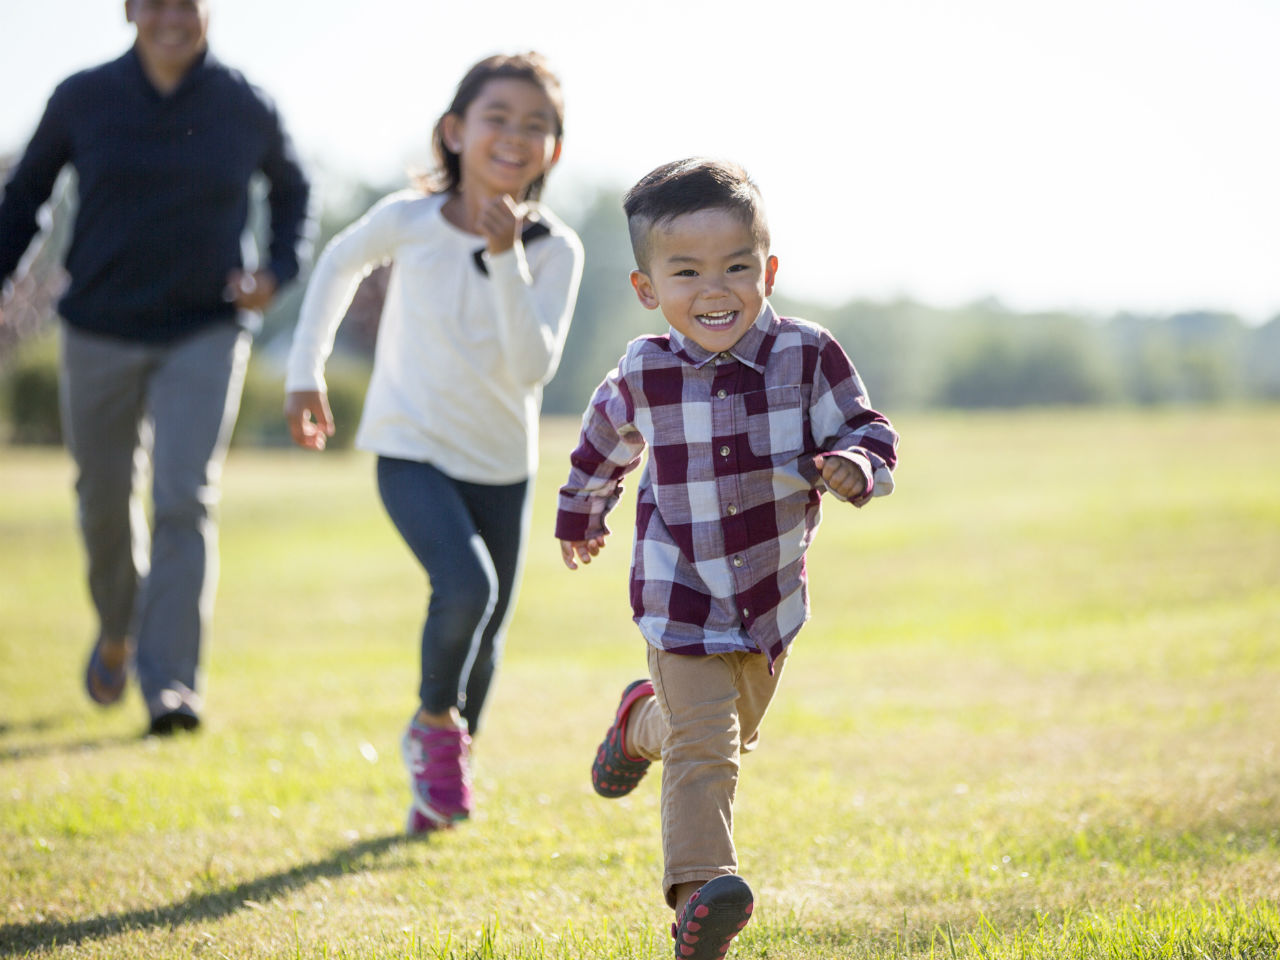 7 Tips to Keep Kids Healthy During the School Year